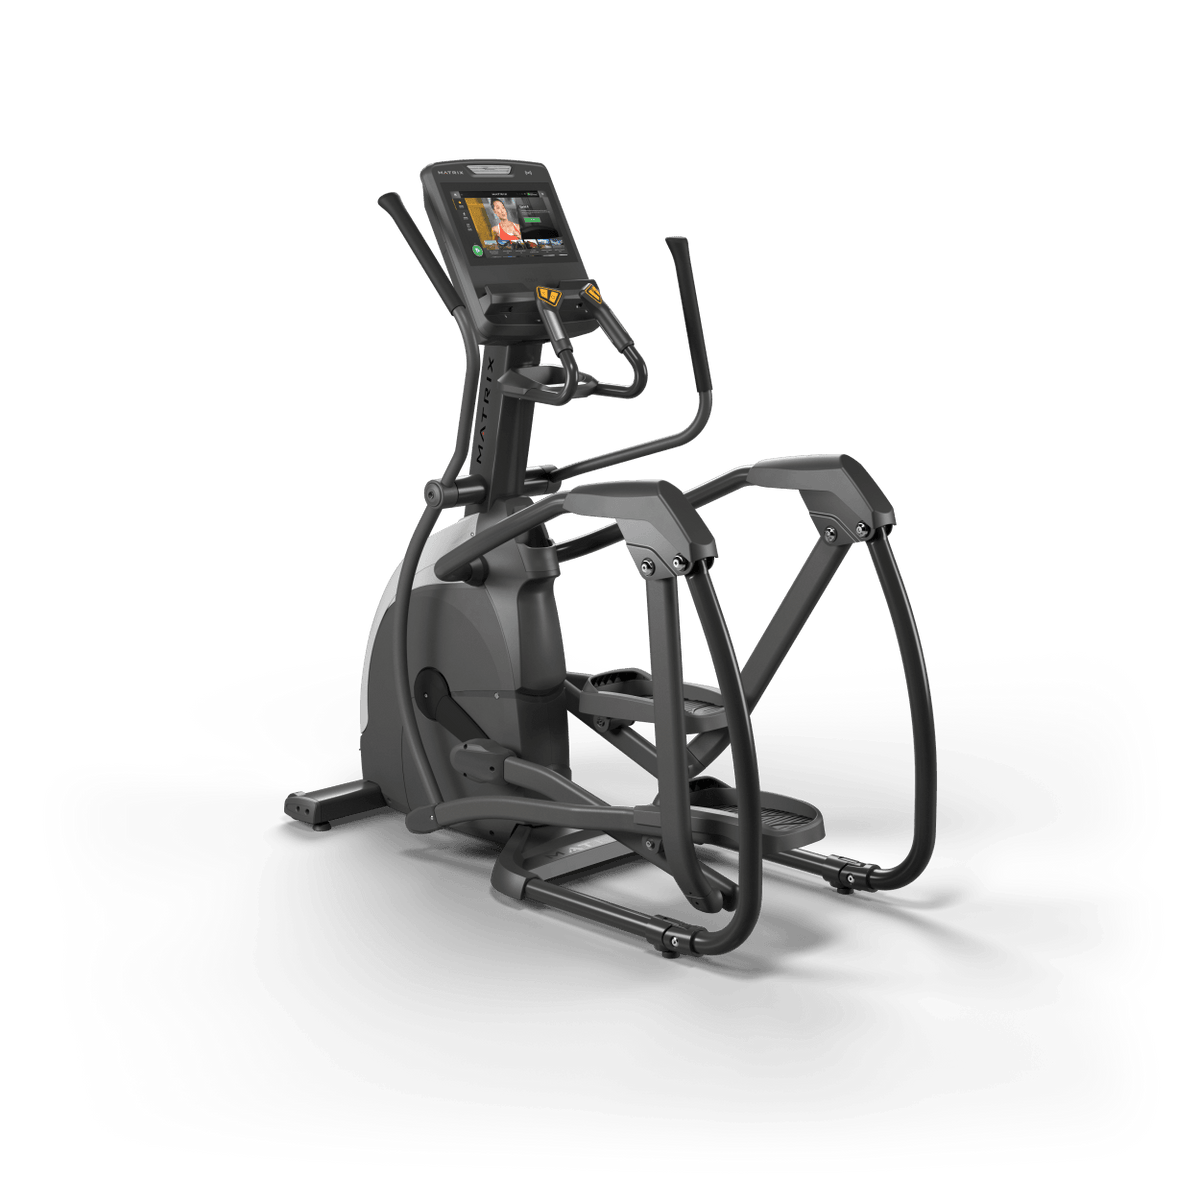 Matrix Fitness Endurance Elliptical with Touch Console full view | Fitness Experience